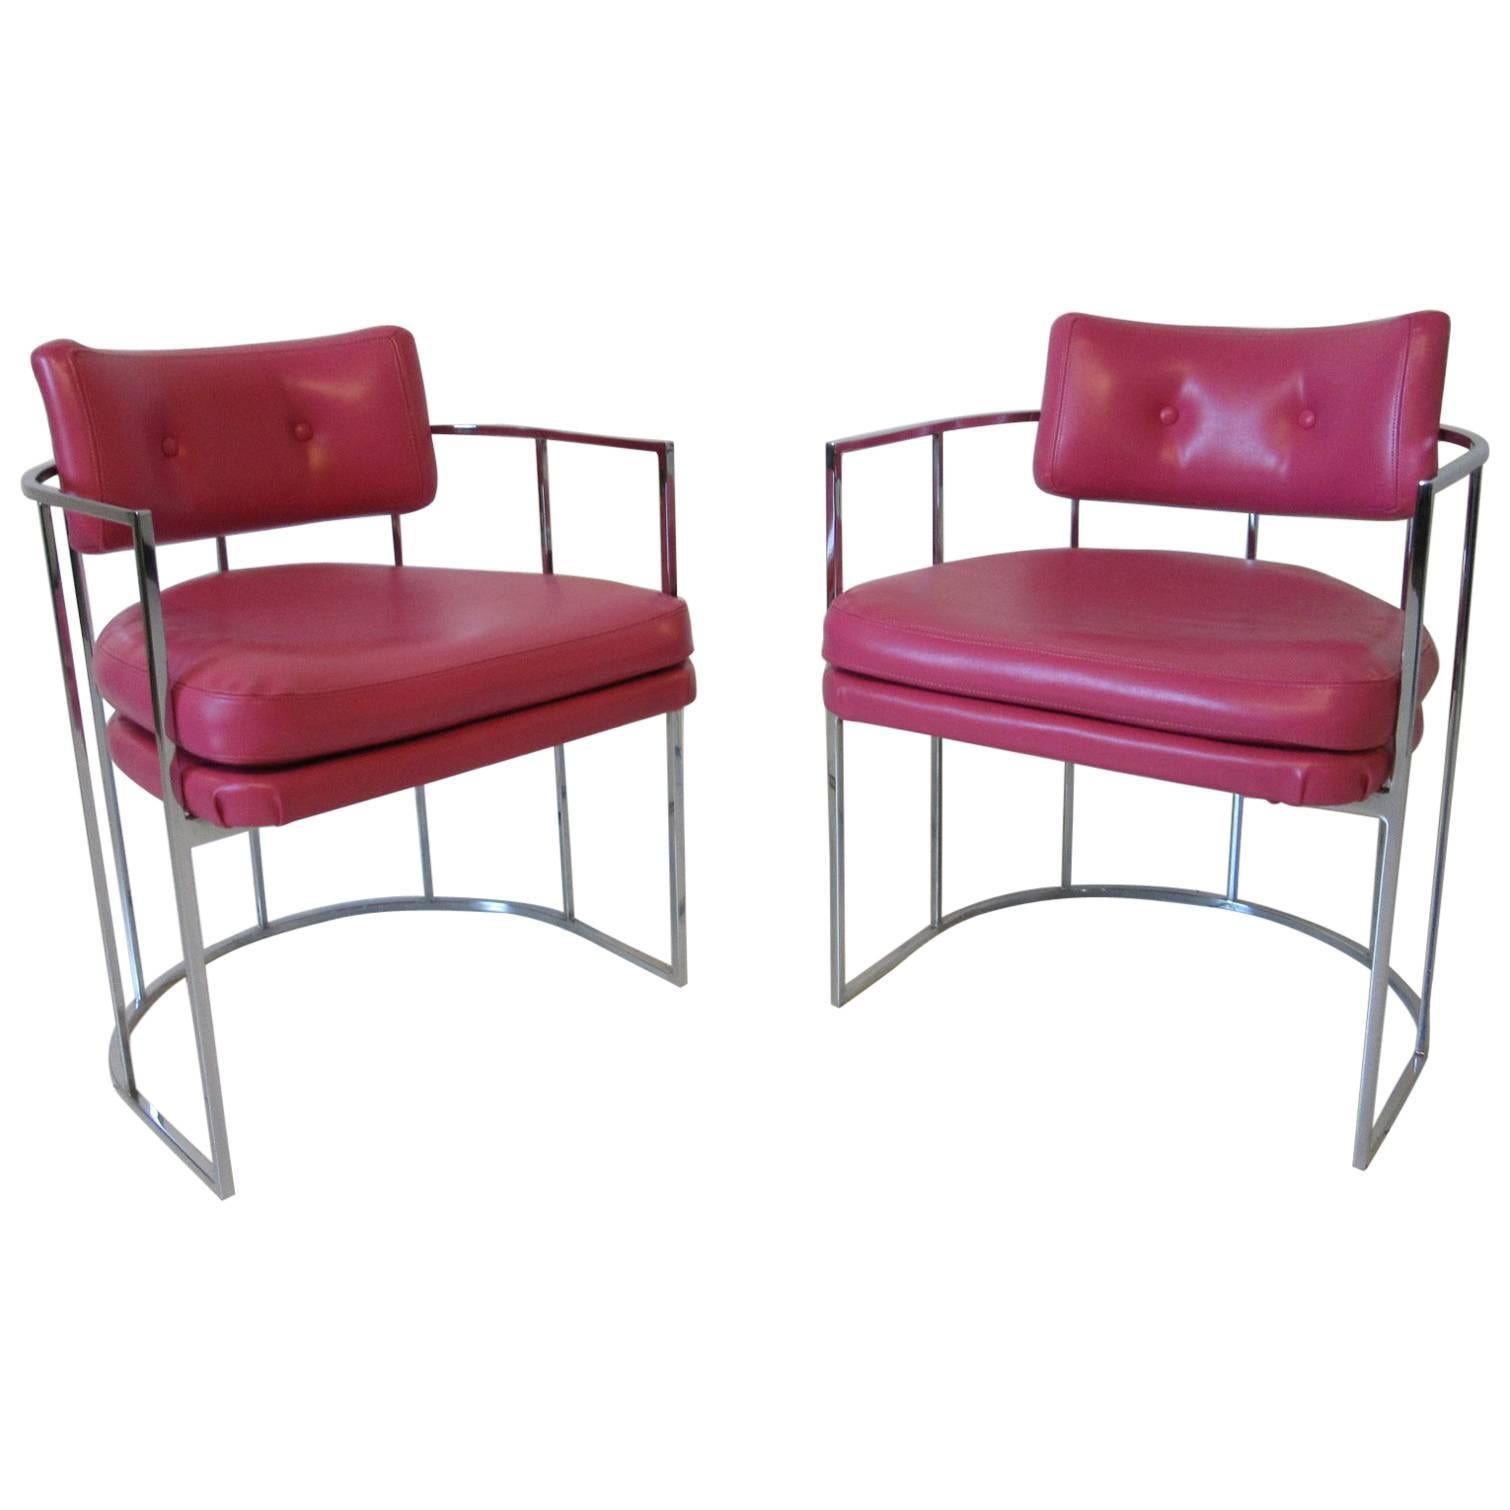 Milo Baughman Chrome and Upholstered Chairs